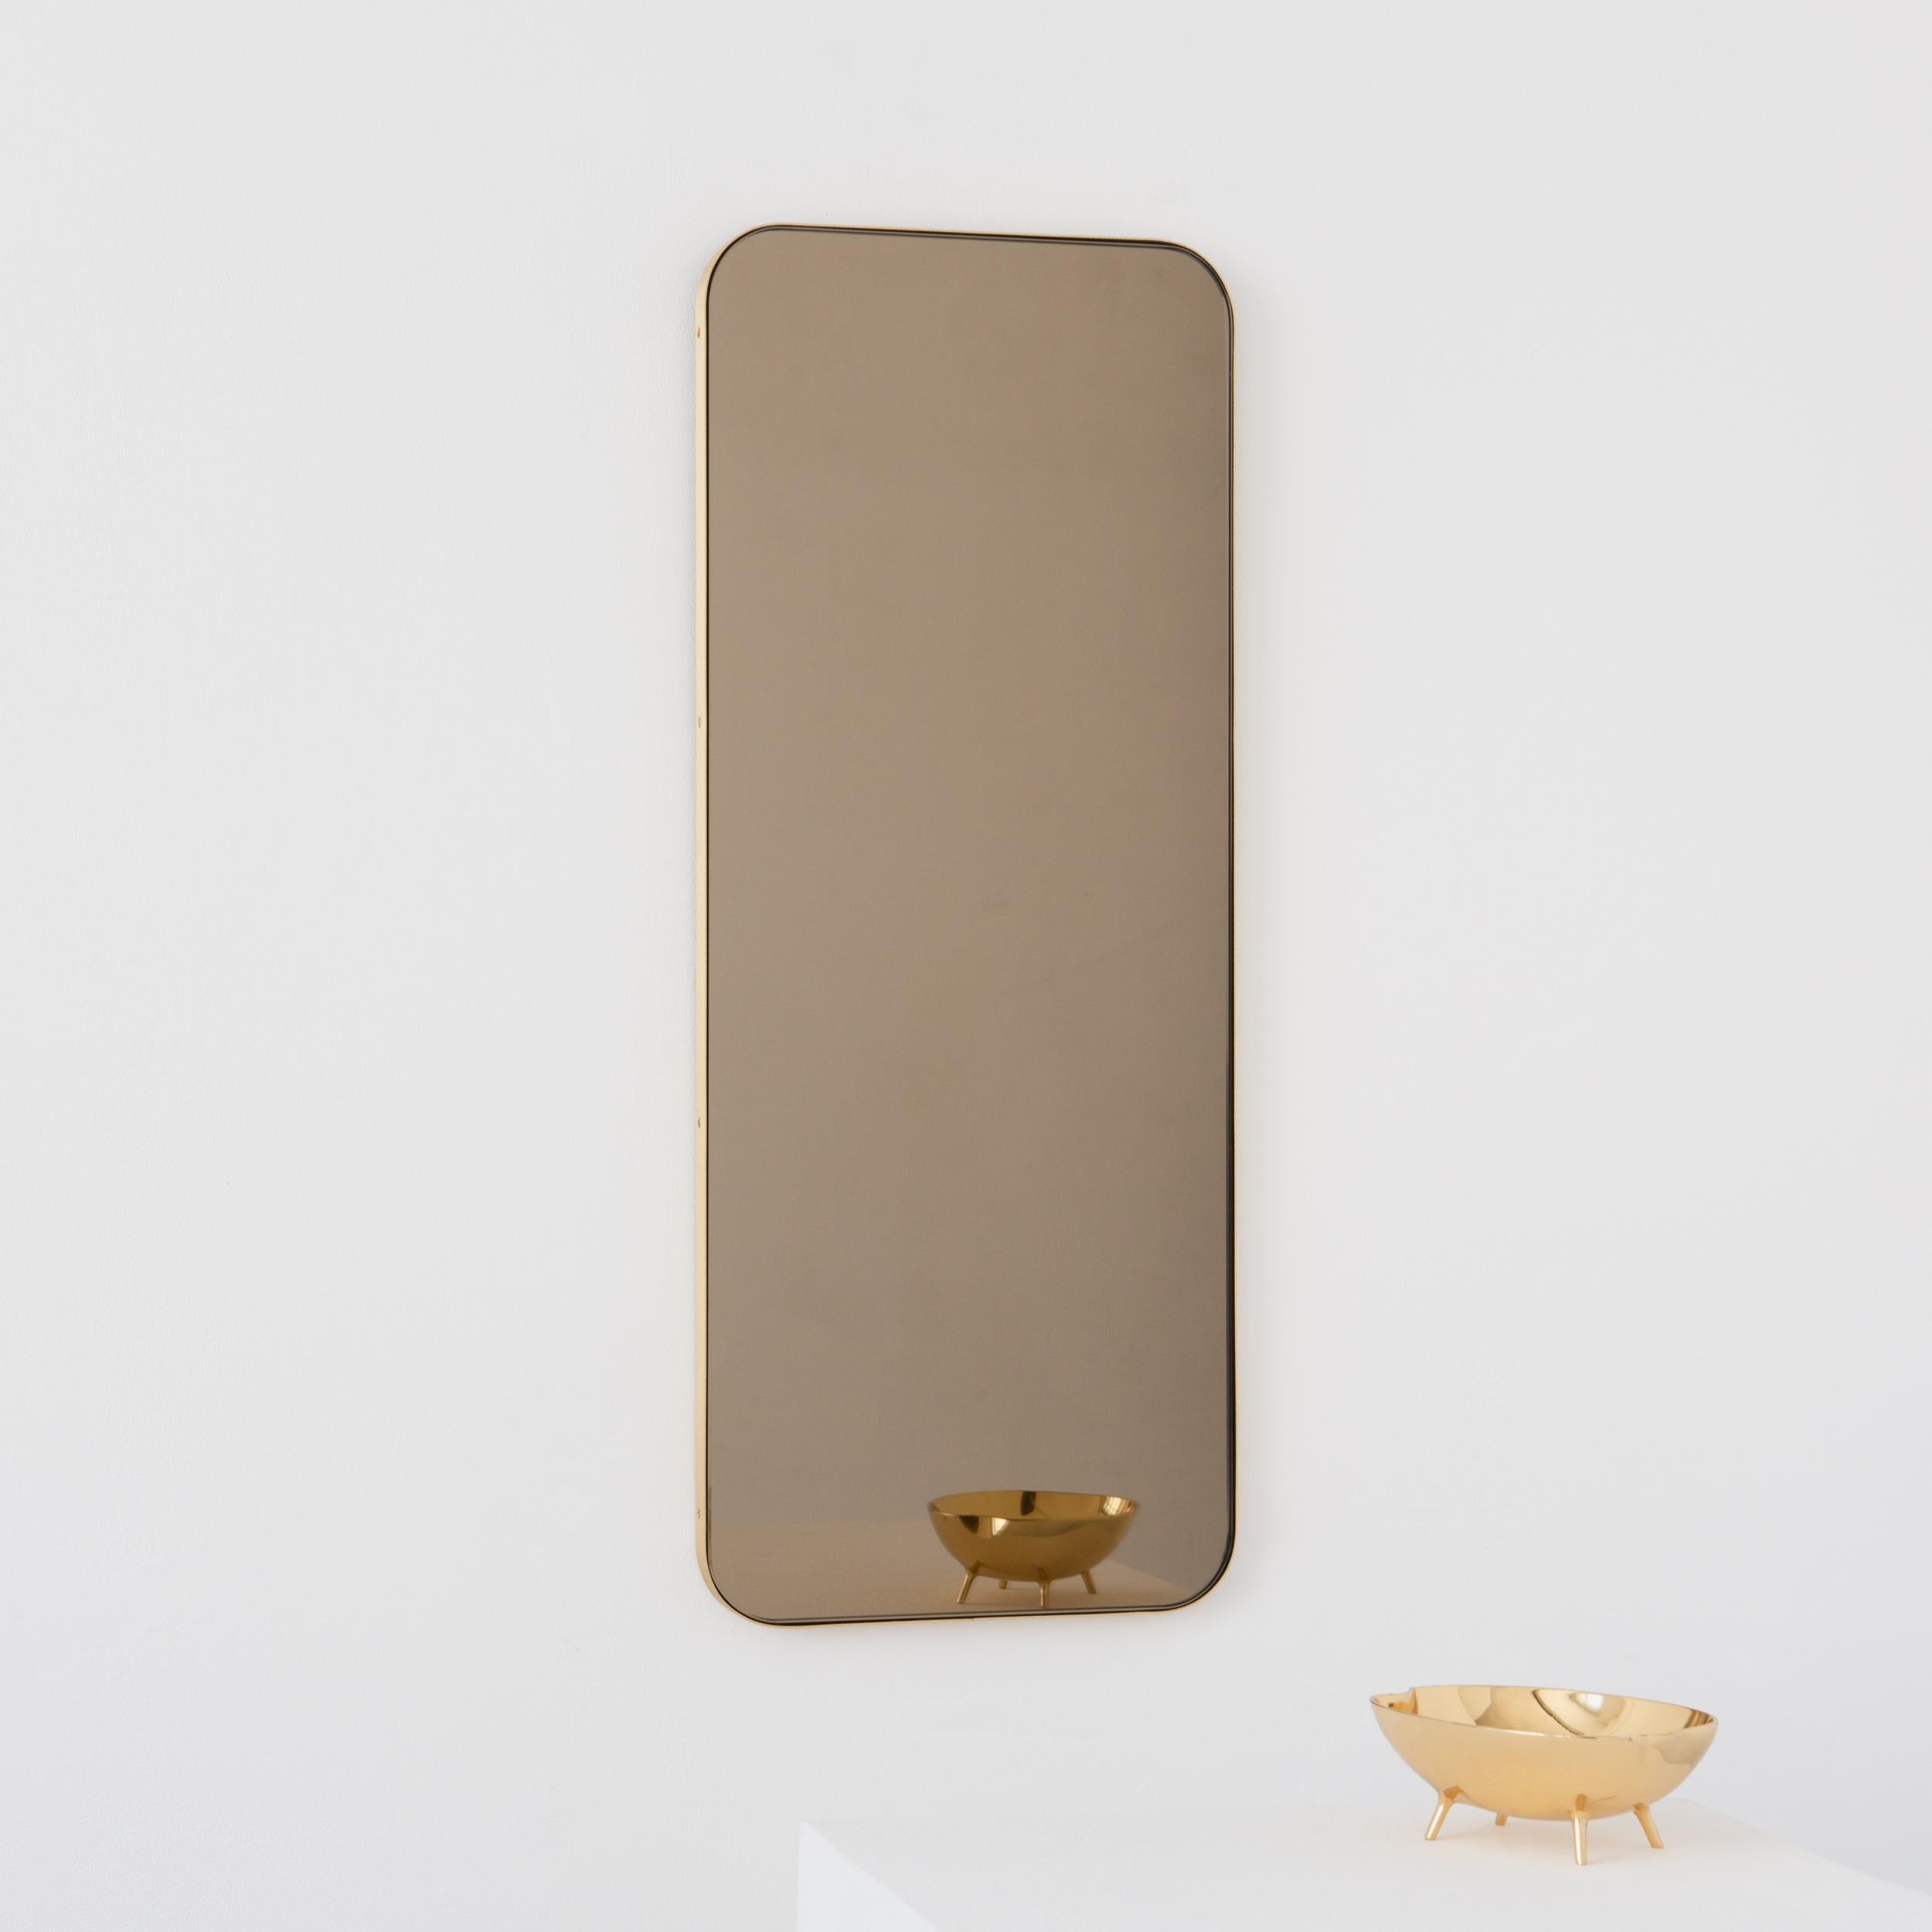 Modern bronze tinted rectangular mirror with an elegant solid brushed brass frame. Part of the charming Quadris™ collection, designed and handcrafted in London, UK. 

Our mirrors are designed with an integrated French cleat (split batten) system